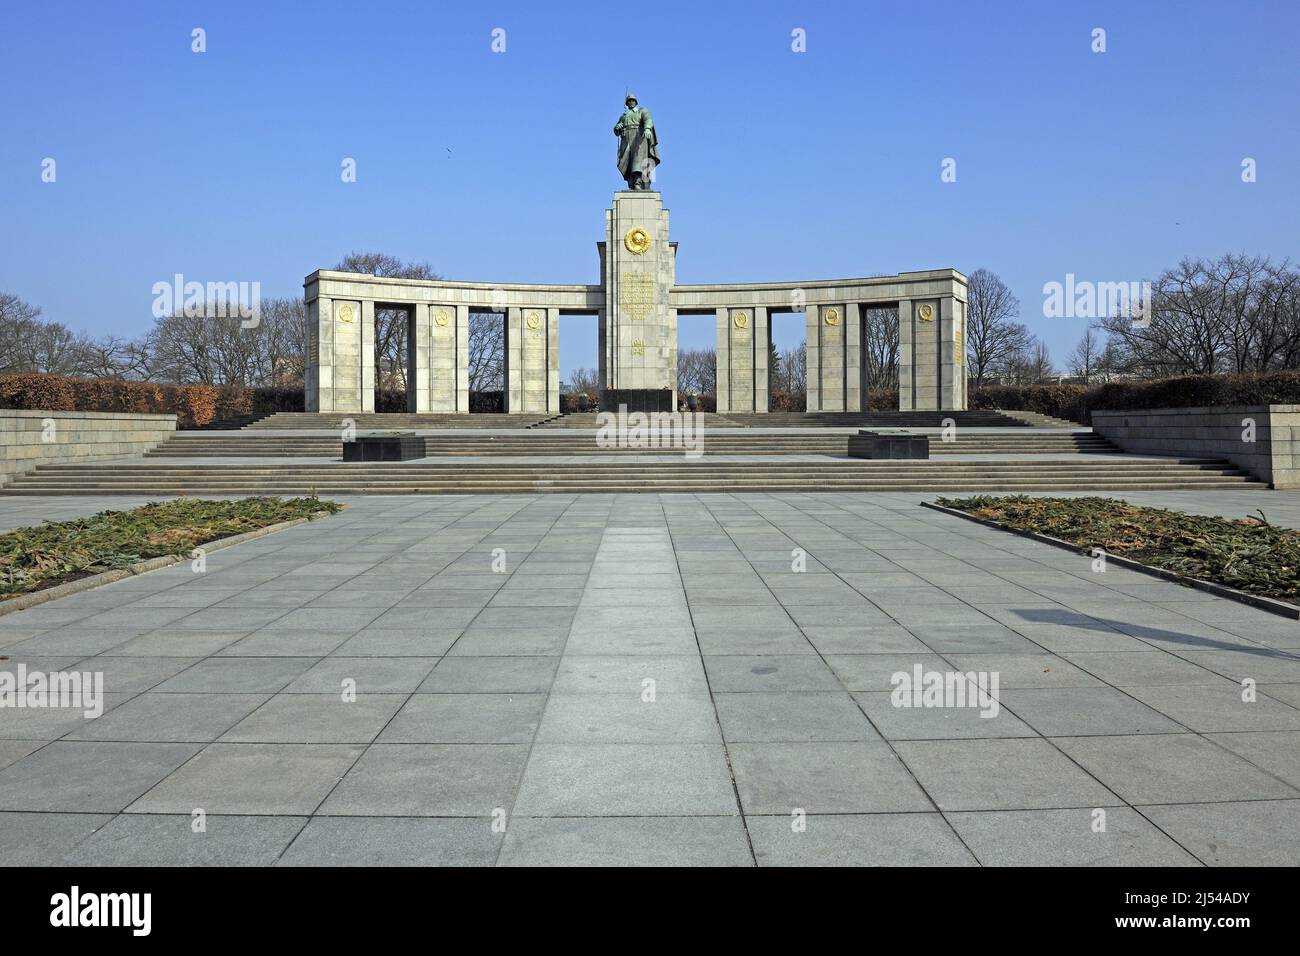 Soviet cenotaph for the killed Russian, Soviet soldiers of the World War II, Strasse des 17. Juni, Germany, Berlin Stock Photo